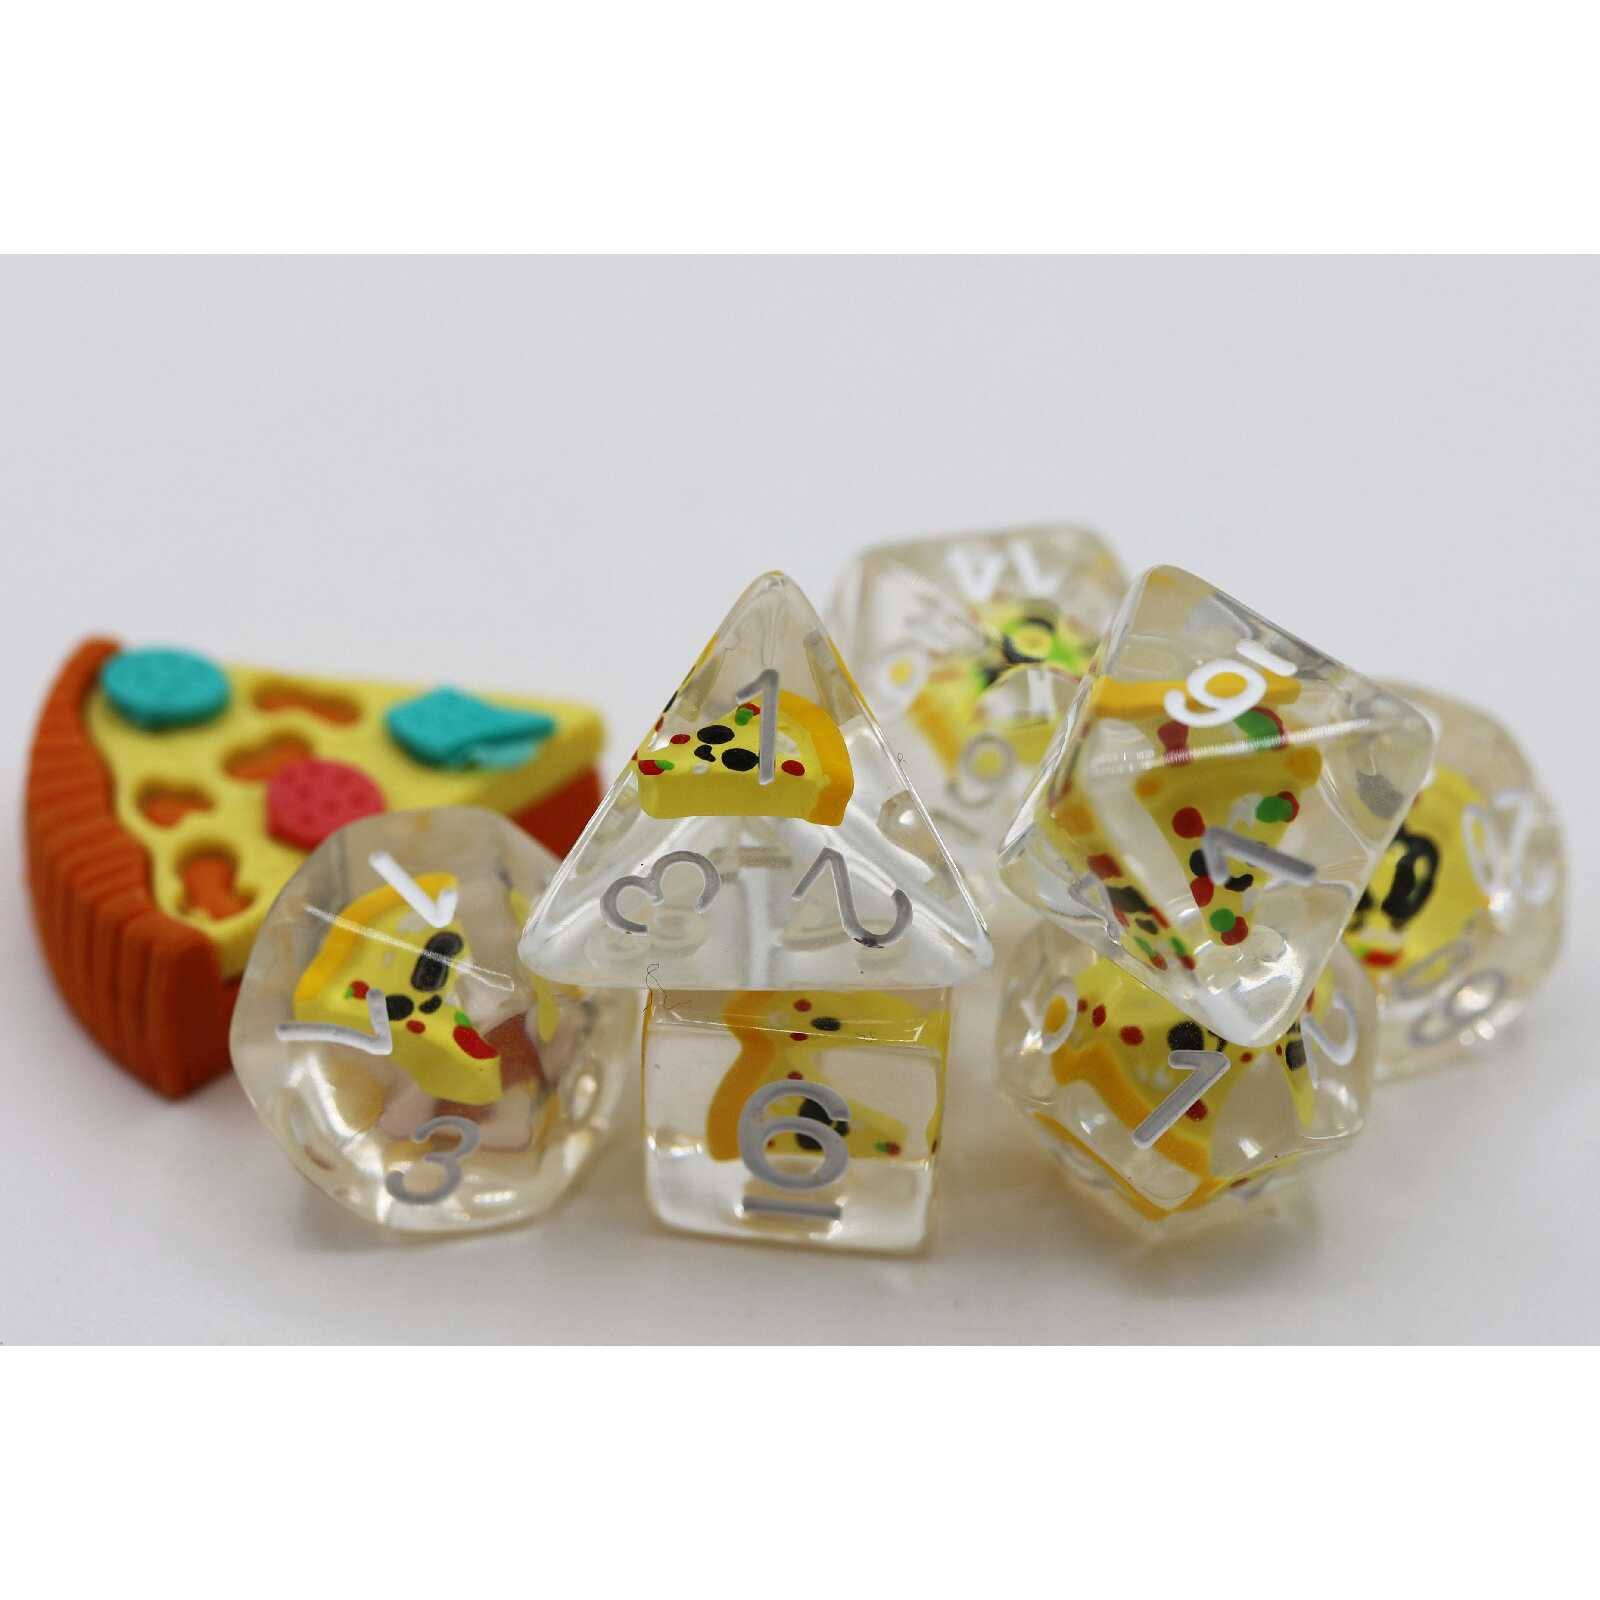 Dice And Gaming Accessories Polyhedral RPG Sets Stuff-Inside Pizza (7)